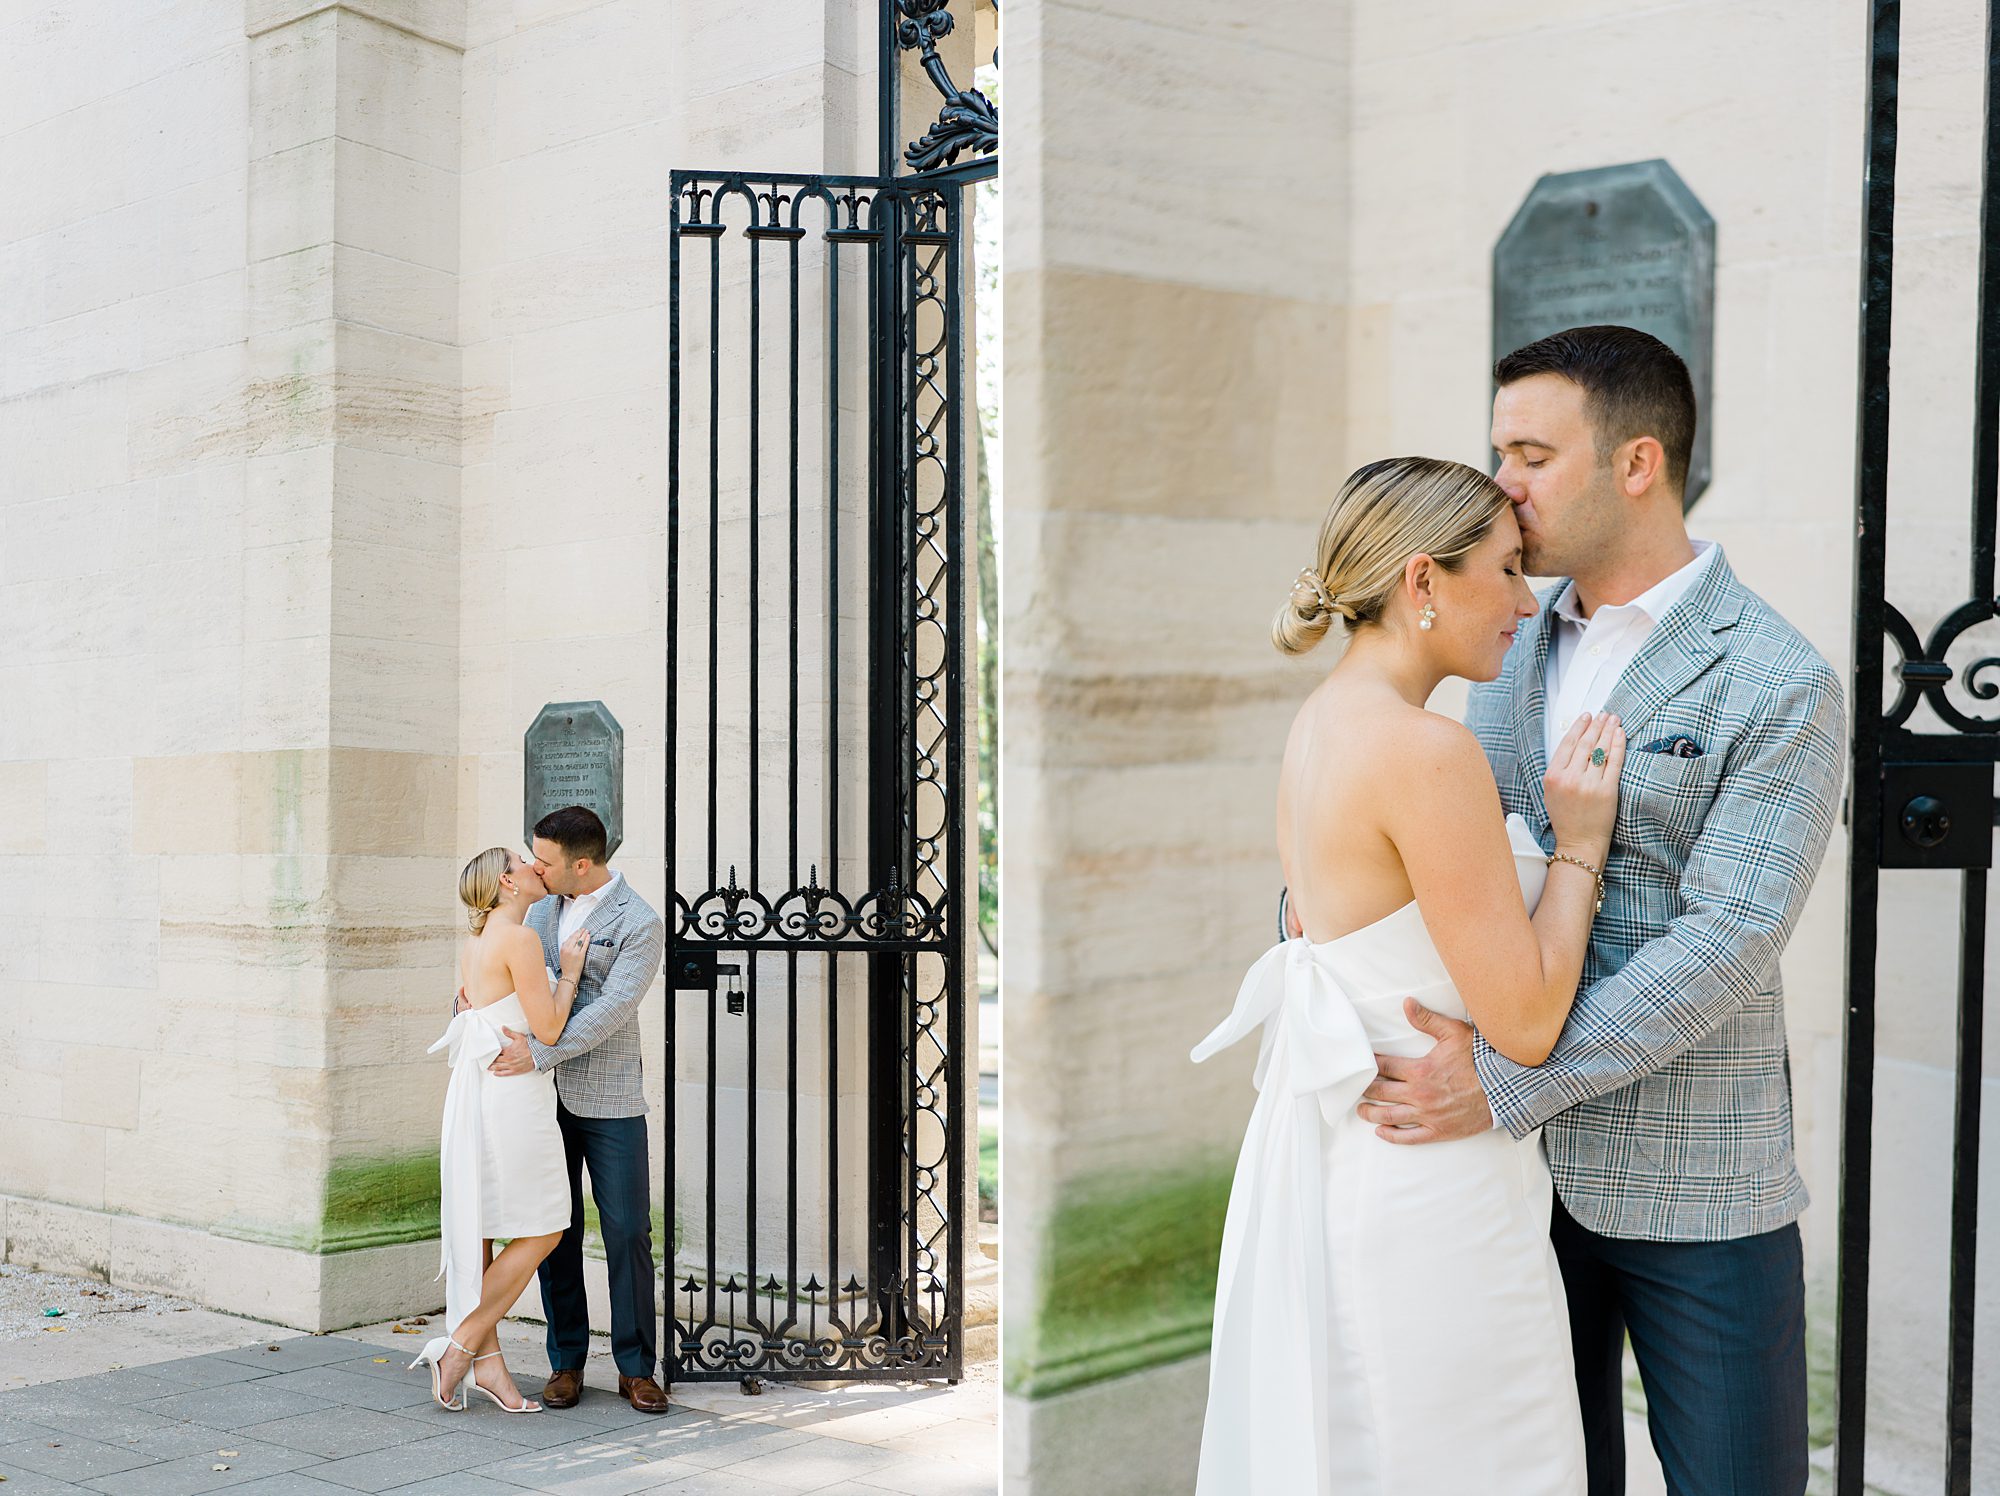 couple kiss by wrought iron gates of Rodin museum in Philadelphia